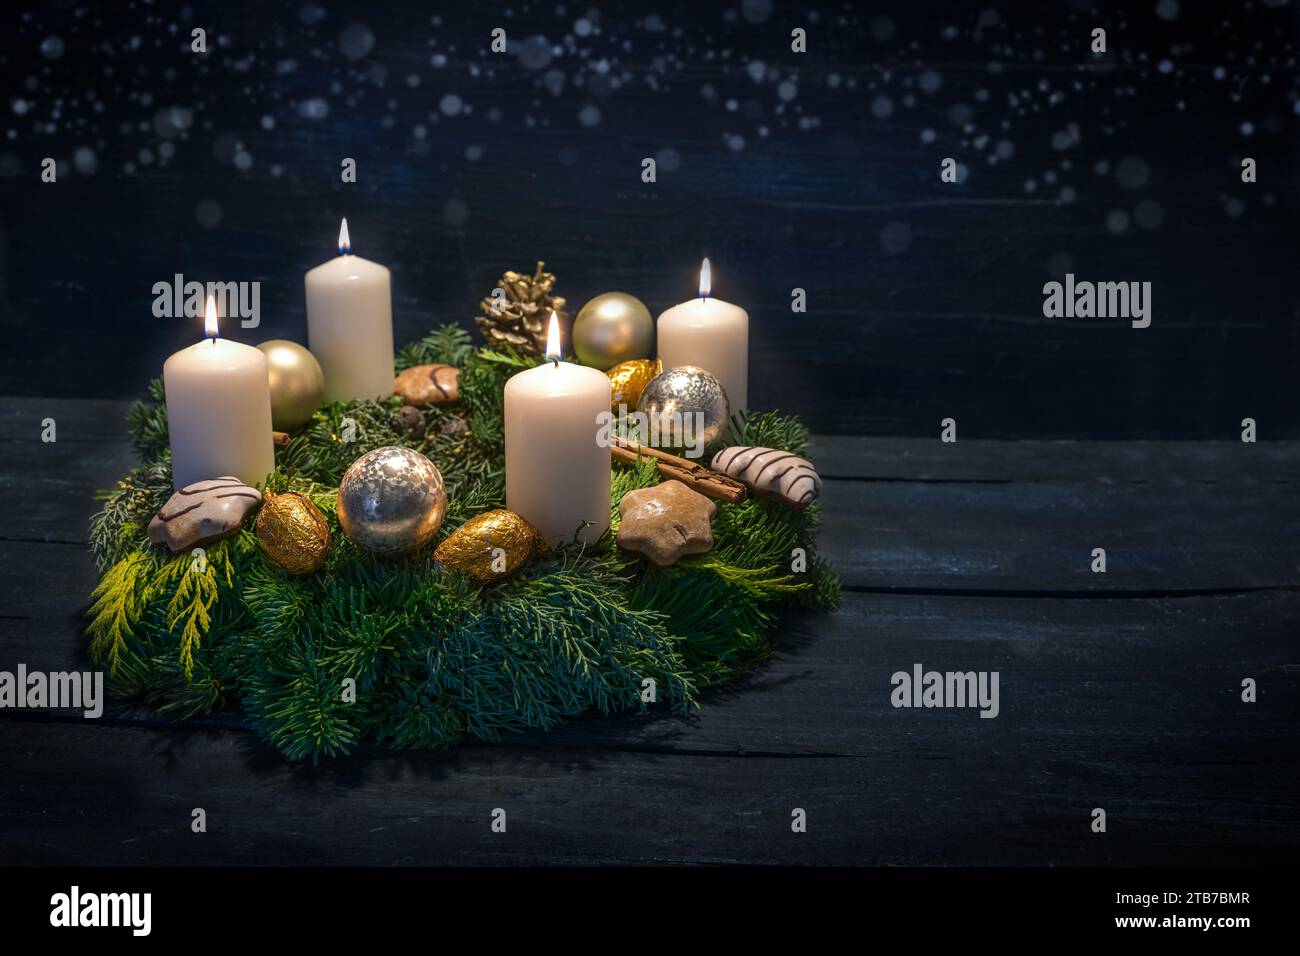 Green advent wreath with white candles, four are lit for fourth advent, Christmas decoration and cookies, dark blue wooden background with star bokeh, Stock Photo